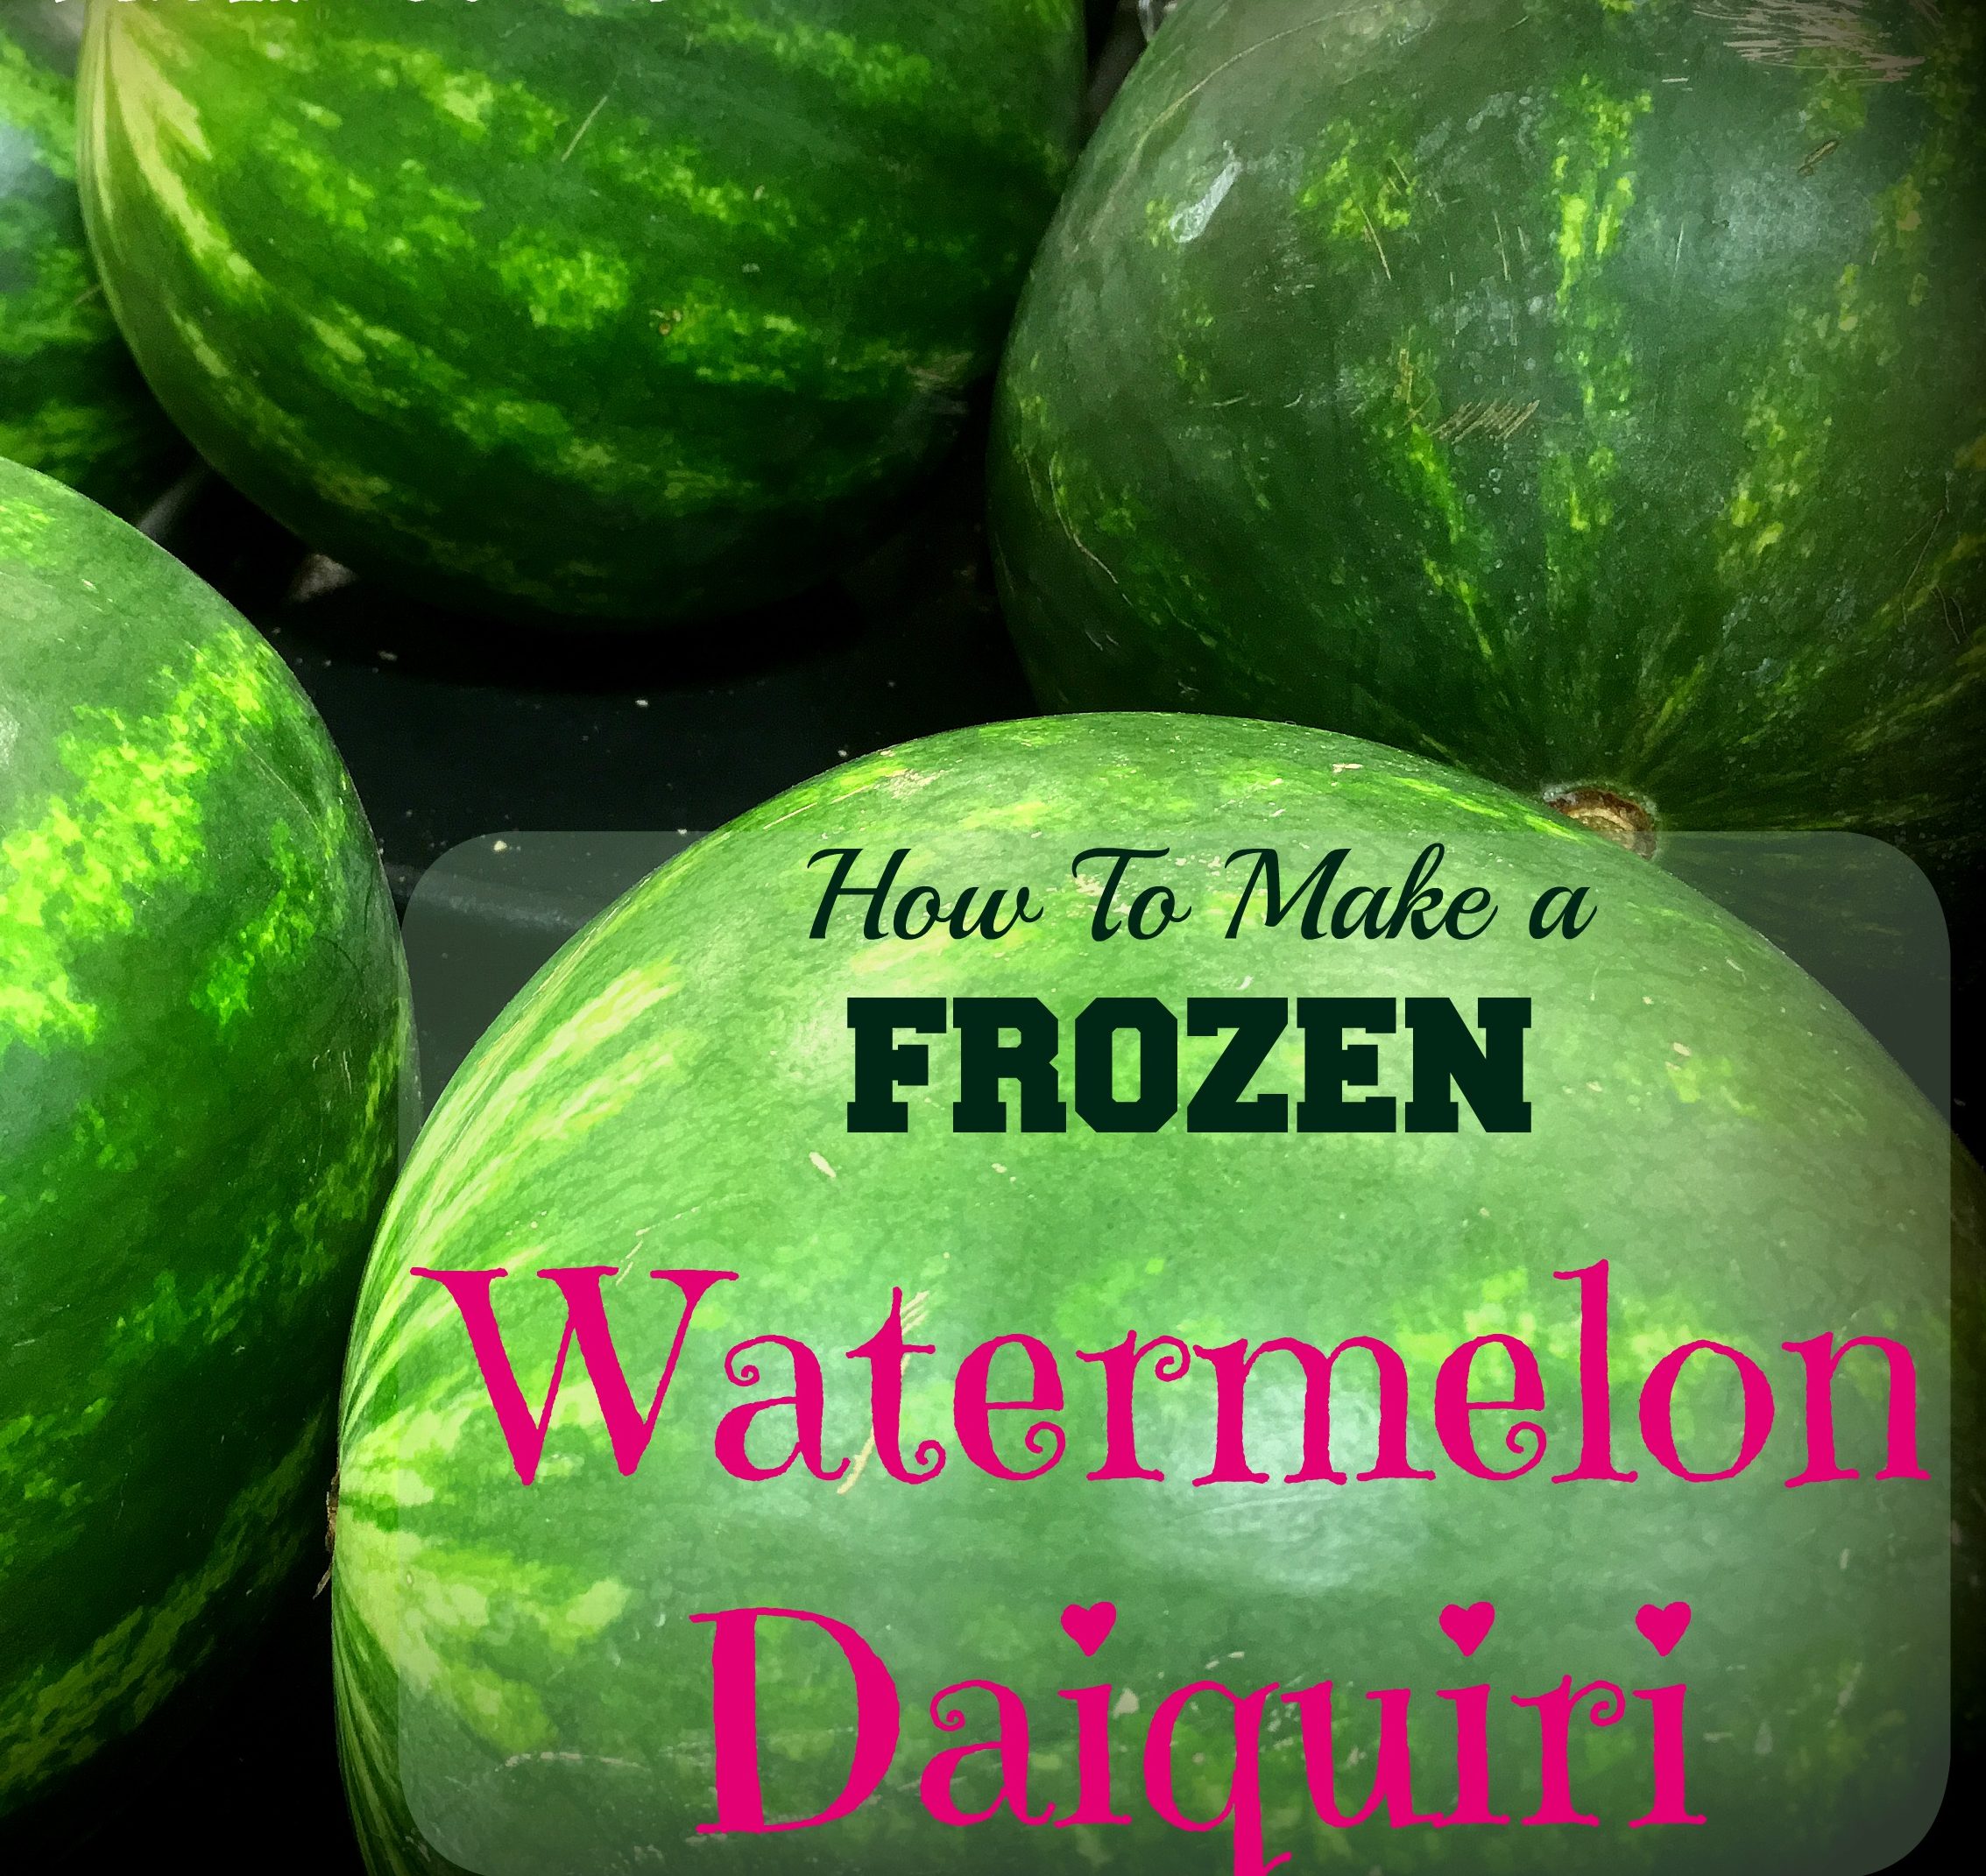 I use seedless watermelon to make a frozen watermelon smoothie, or add rum for a watermelon daiquiri. #TexasHomesteader